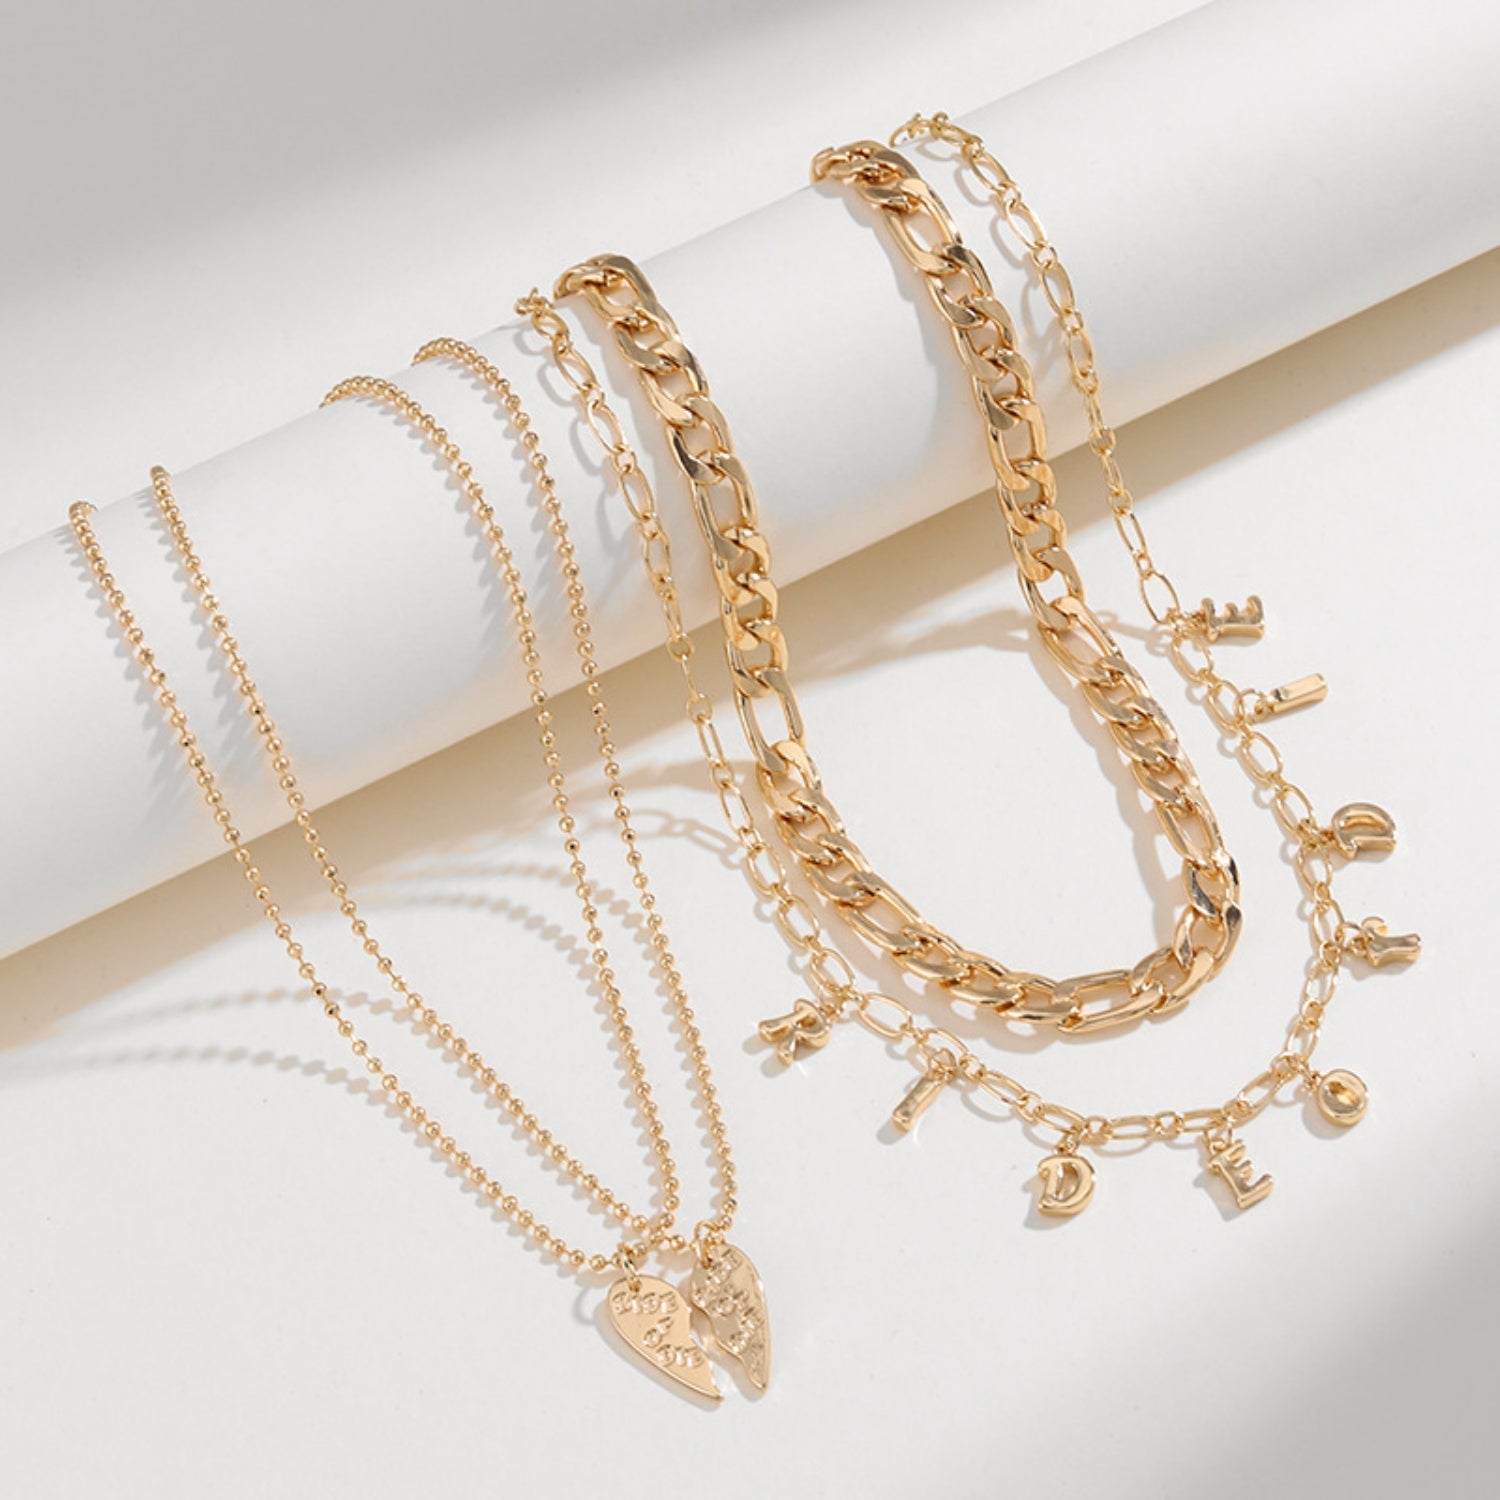 Alloy Double-Layered Necklace with Gold Plating